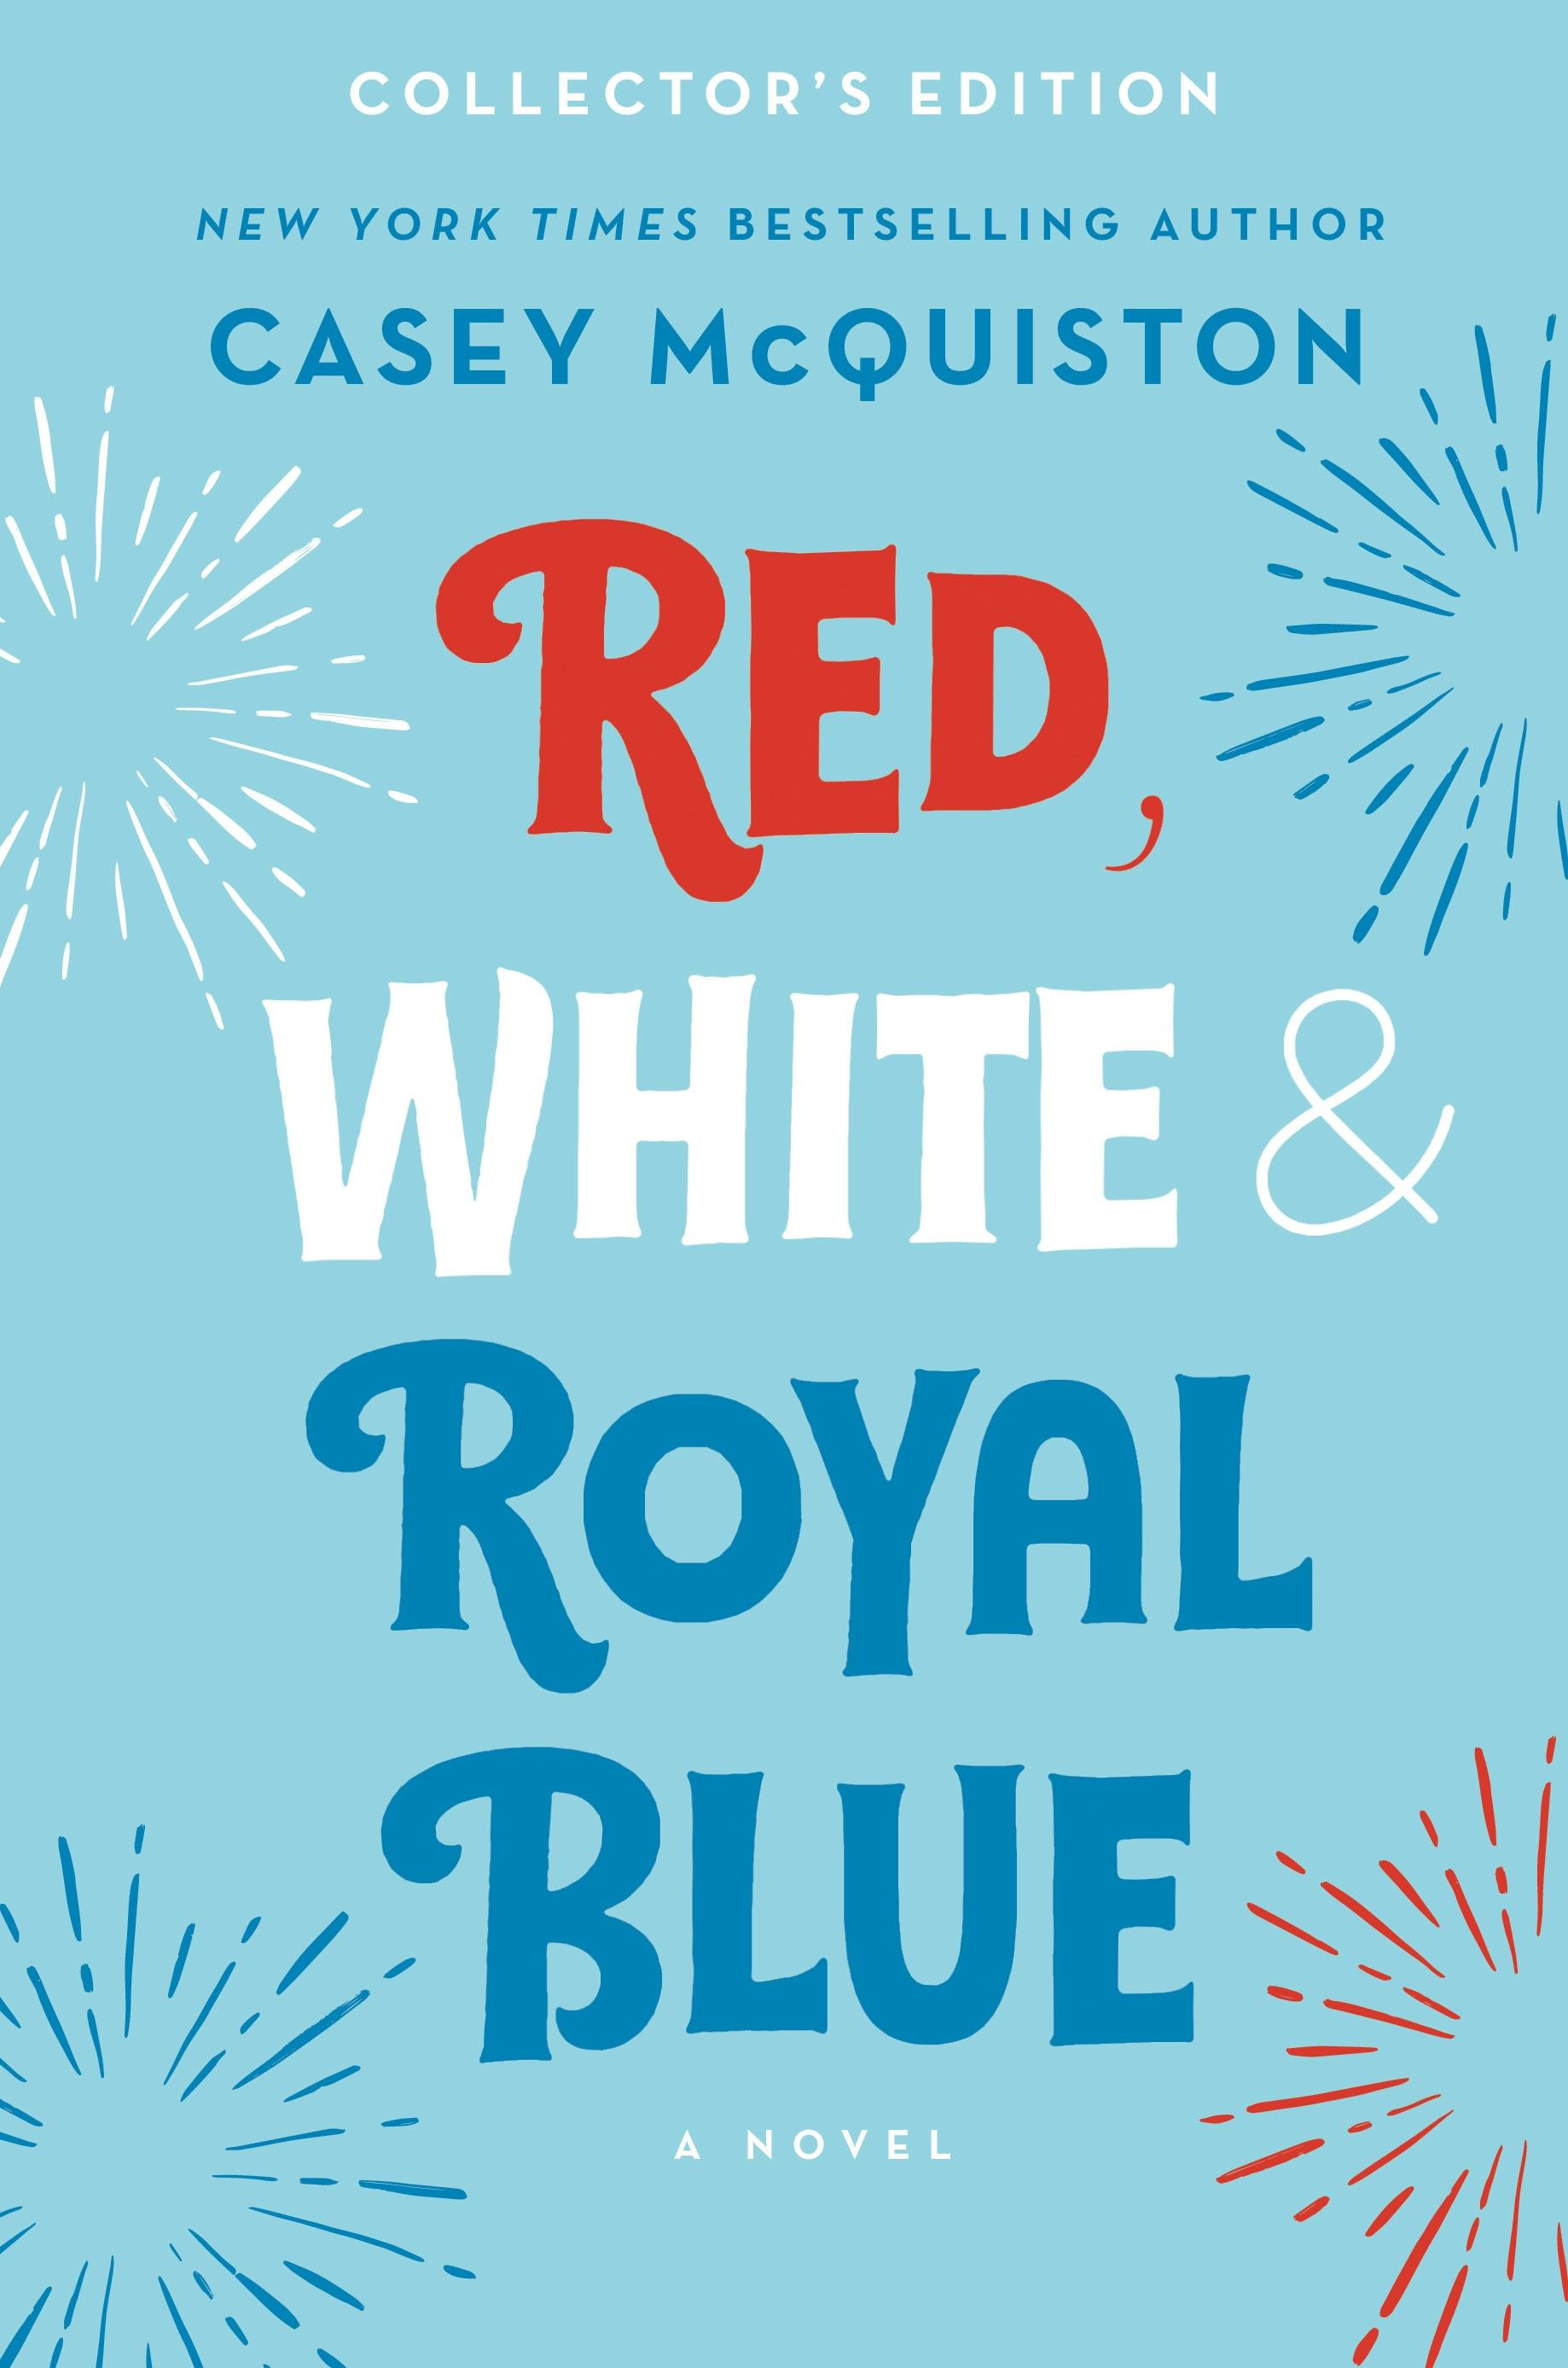 red white & royal blue collector